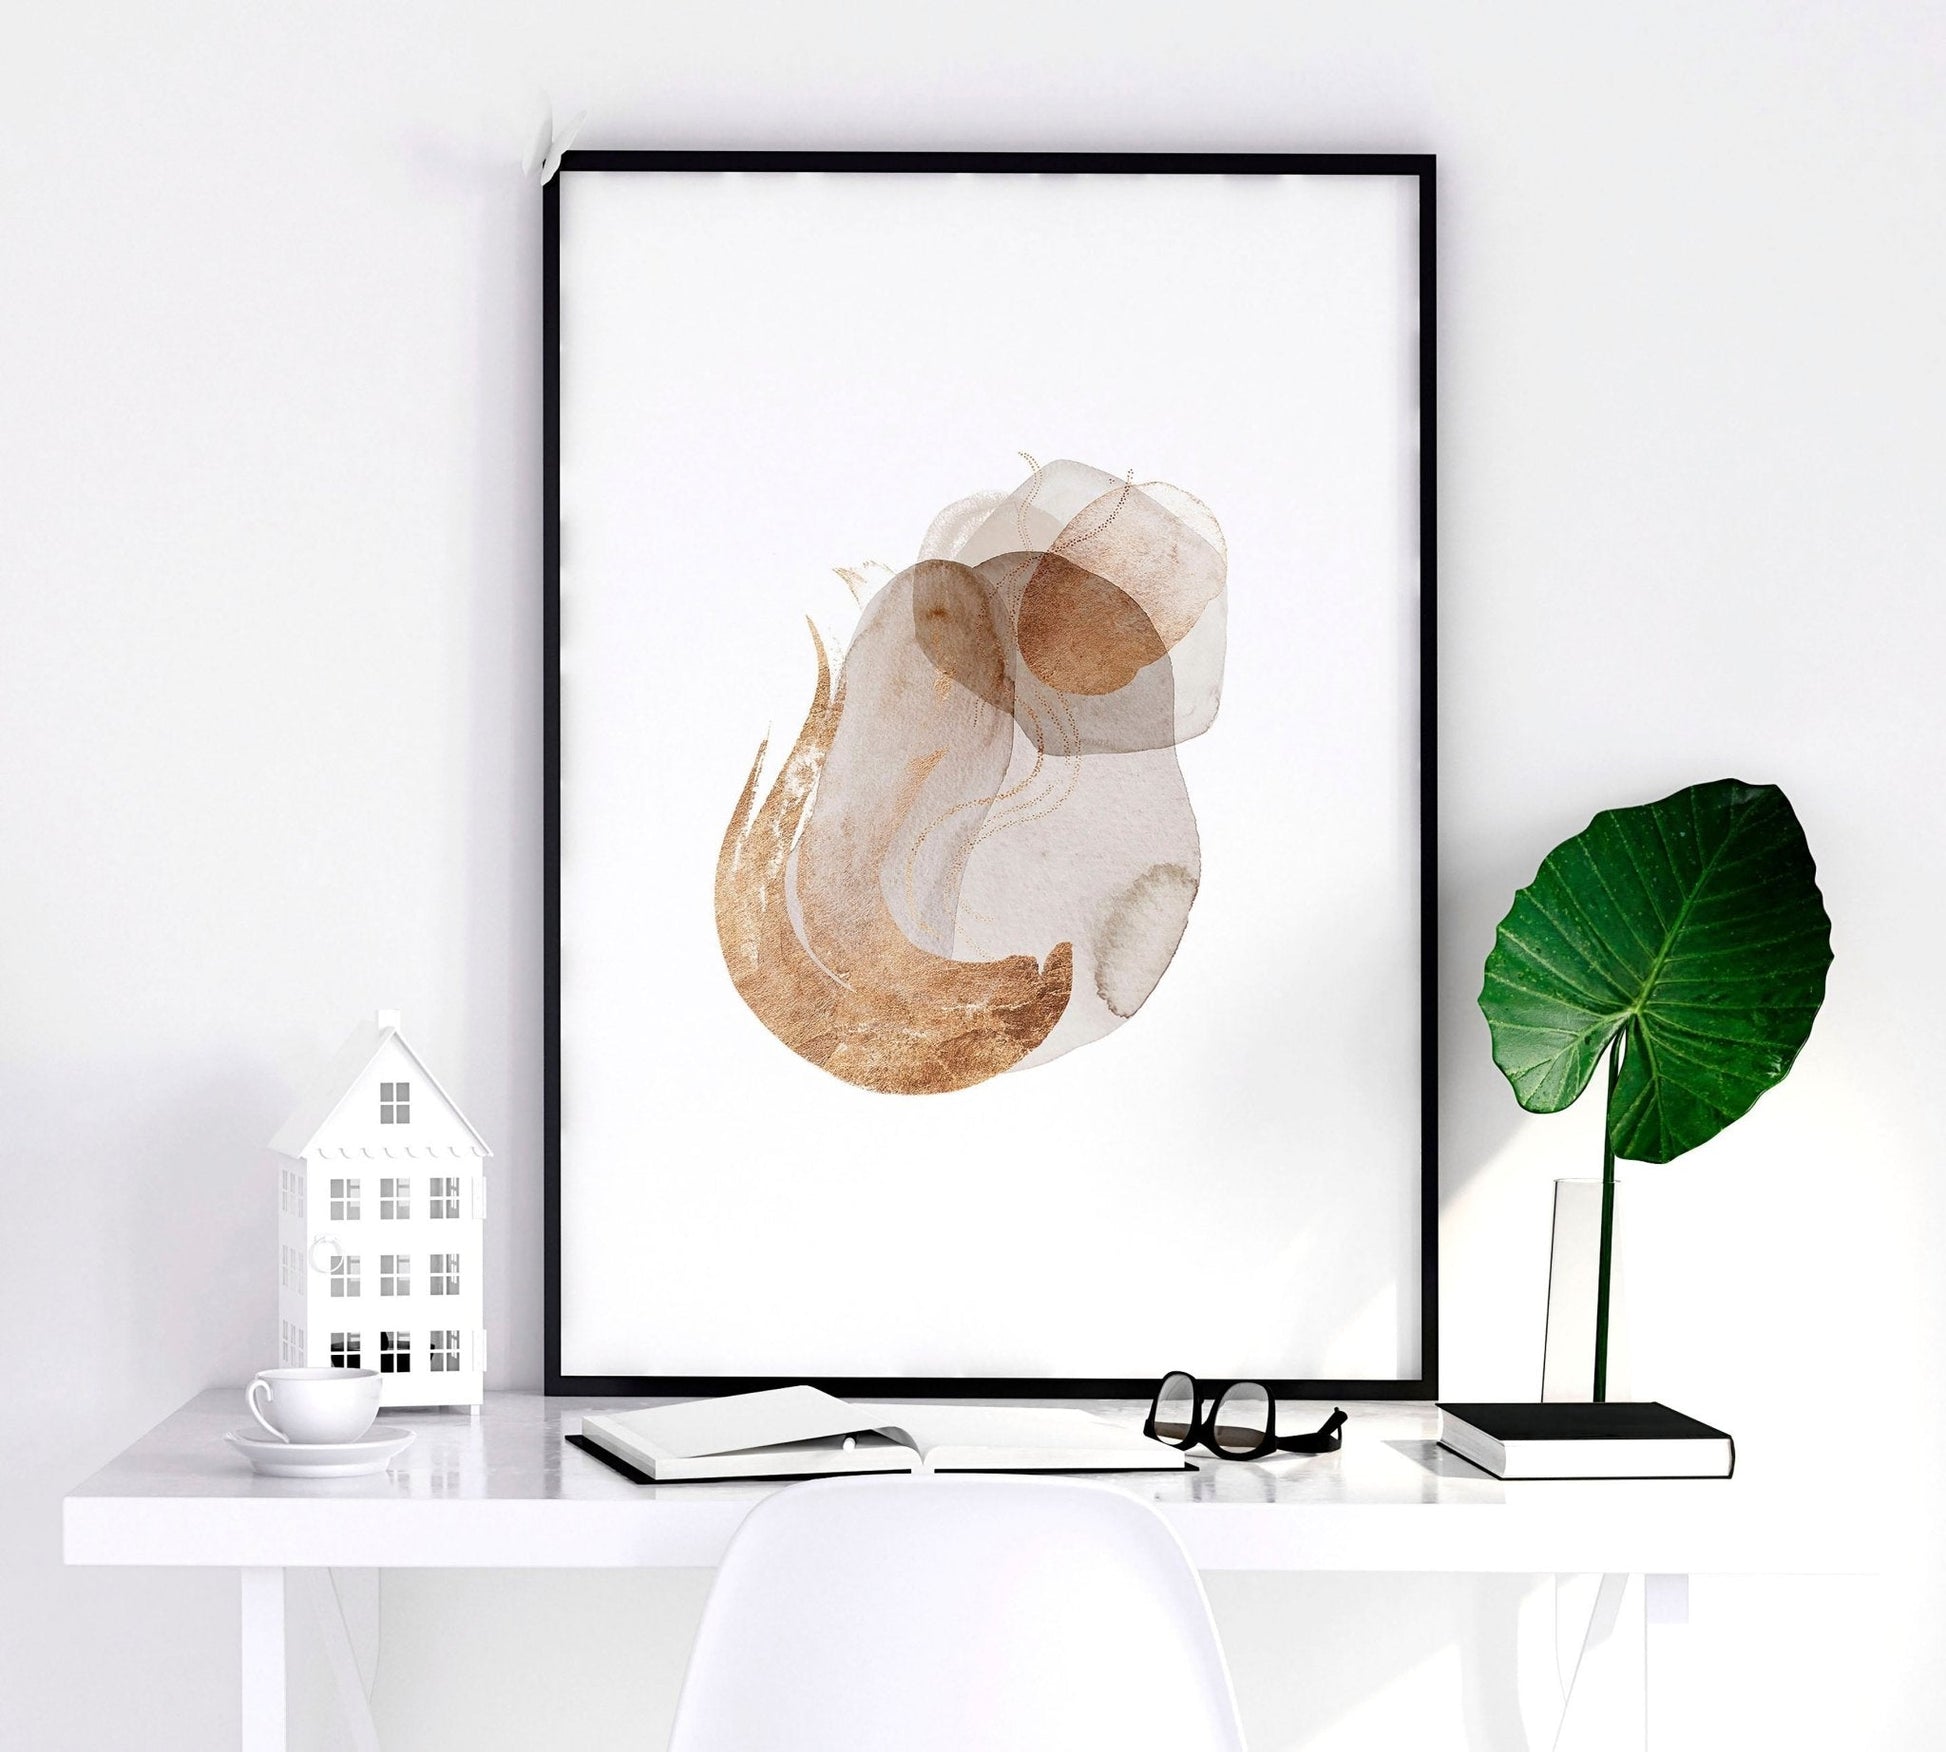 Mid century modern accent wall | set of 3 wall art prints - About Wall Art